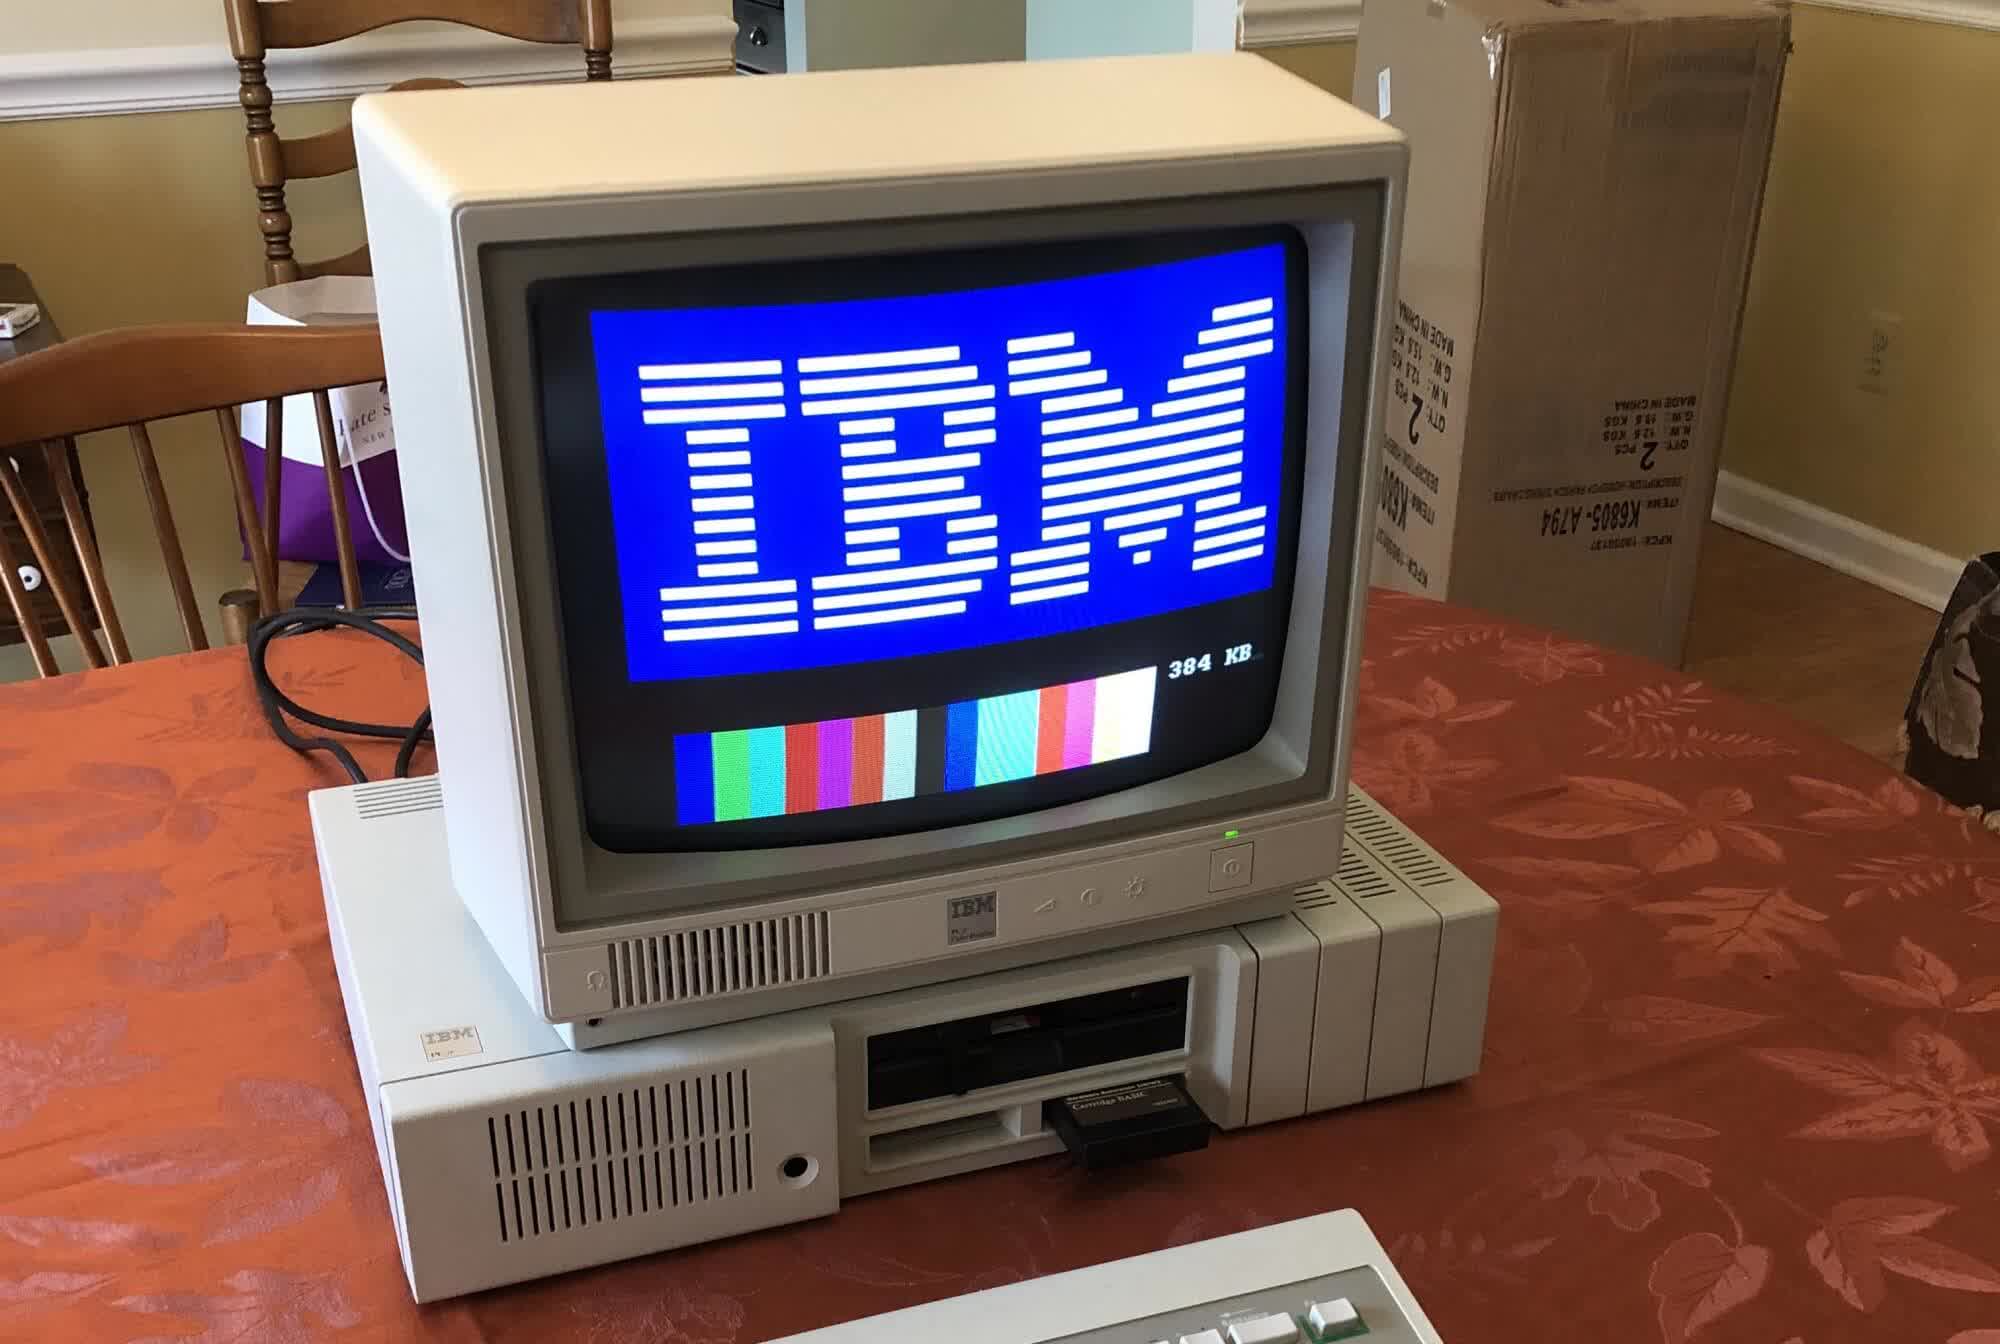 Modder is hosting his personal website on a 40-year-old IBM PCjr